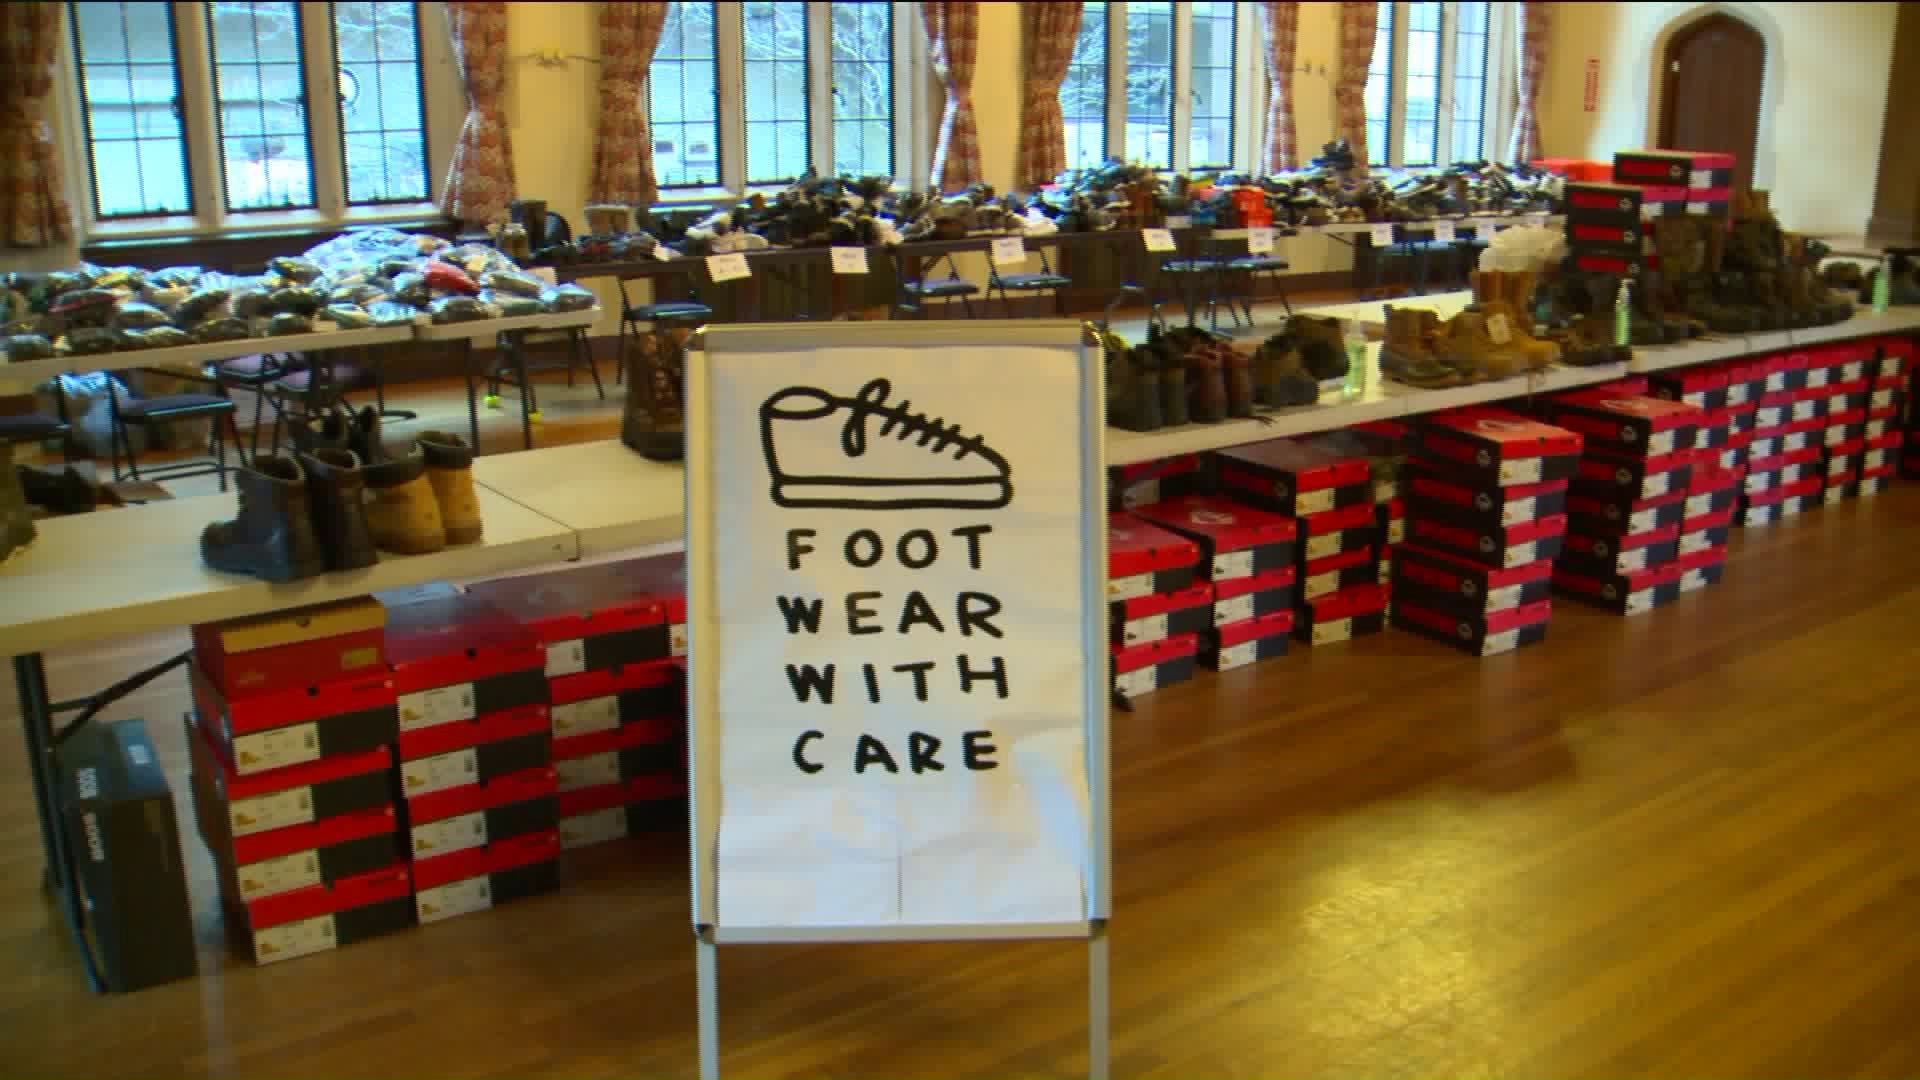 Hundreds of homeless people line up for free boots in Hartford